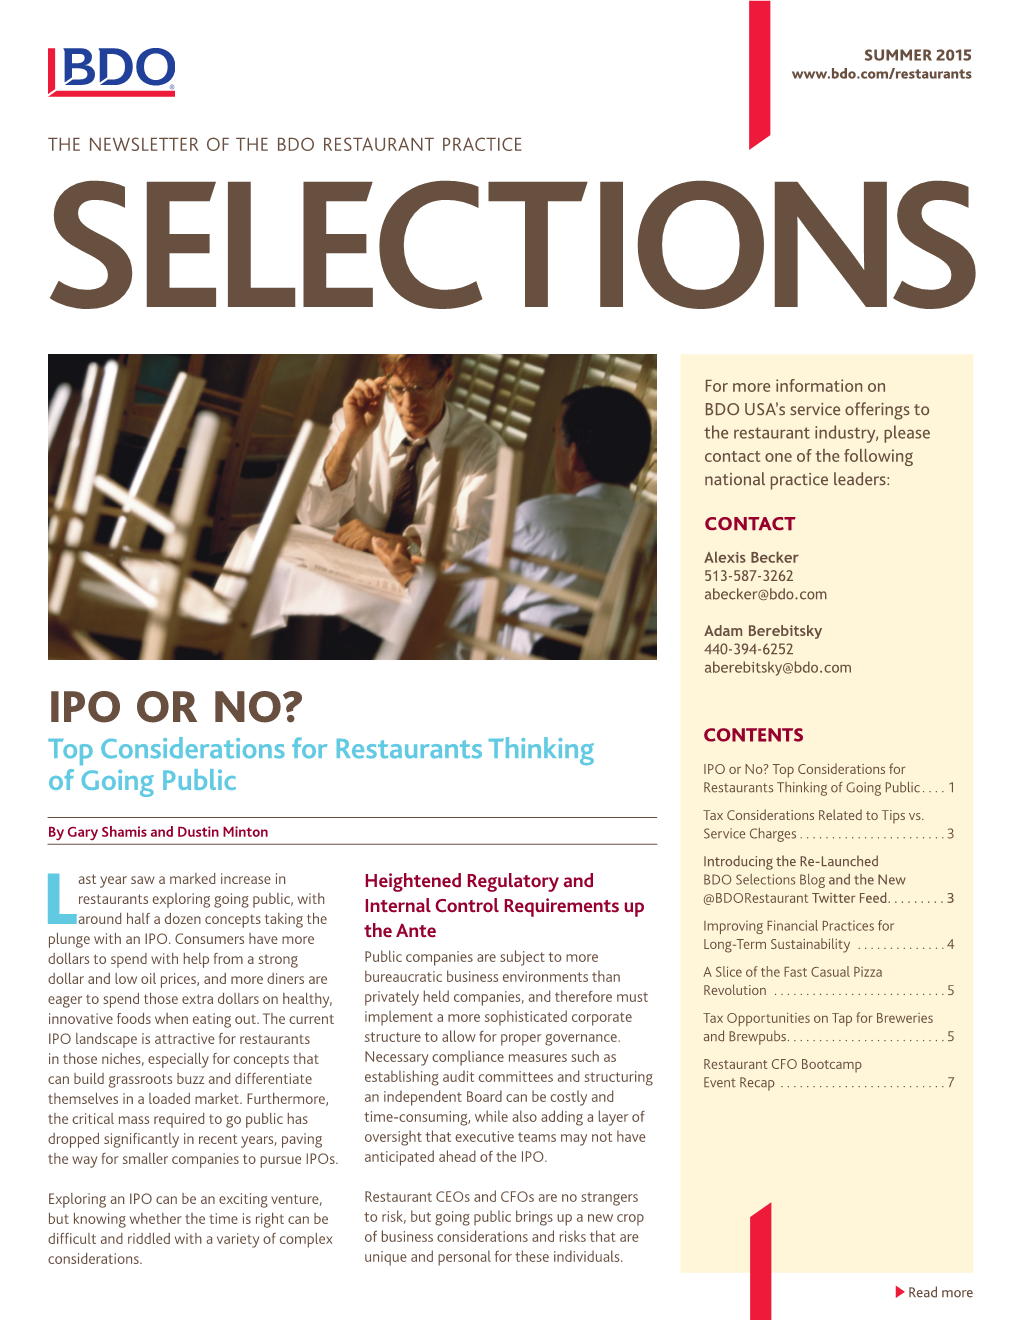 IPO OR NO? Top Considerations for Restaurants Thinking CONTENTS IPO Or No? Top Considerations for of Going Public Restaurants Thinking of Going Public